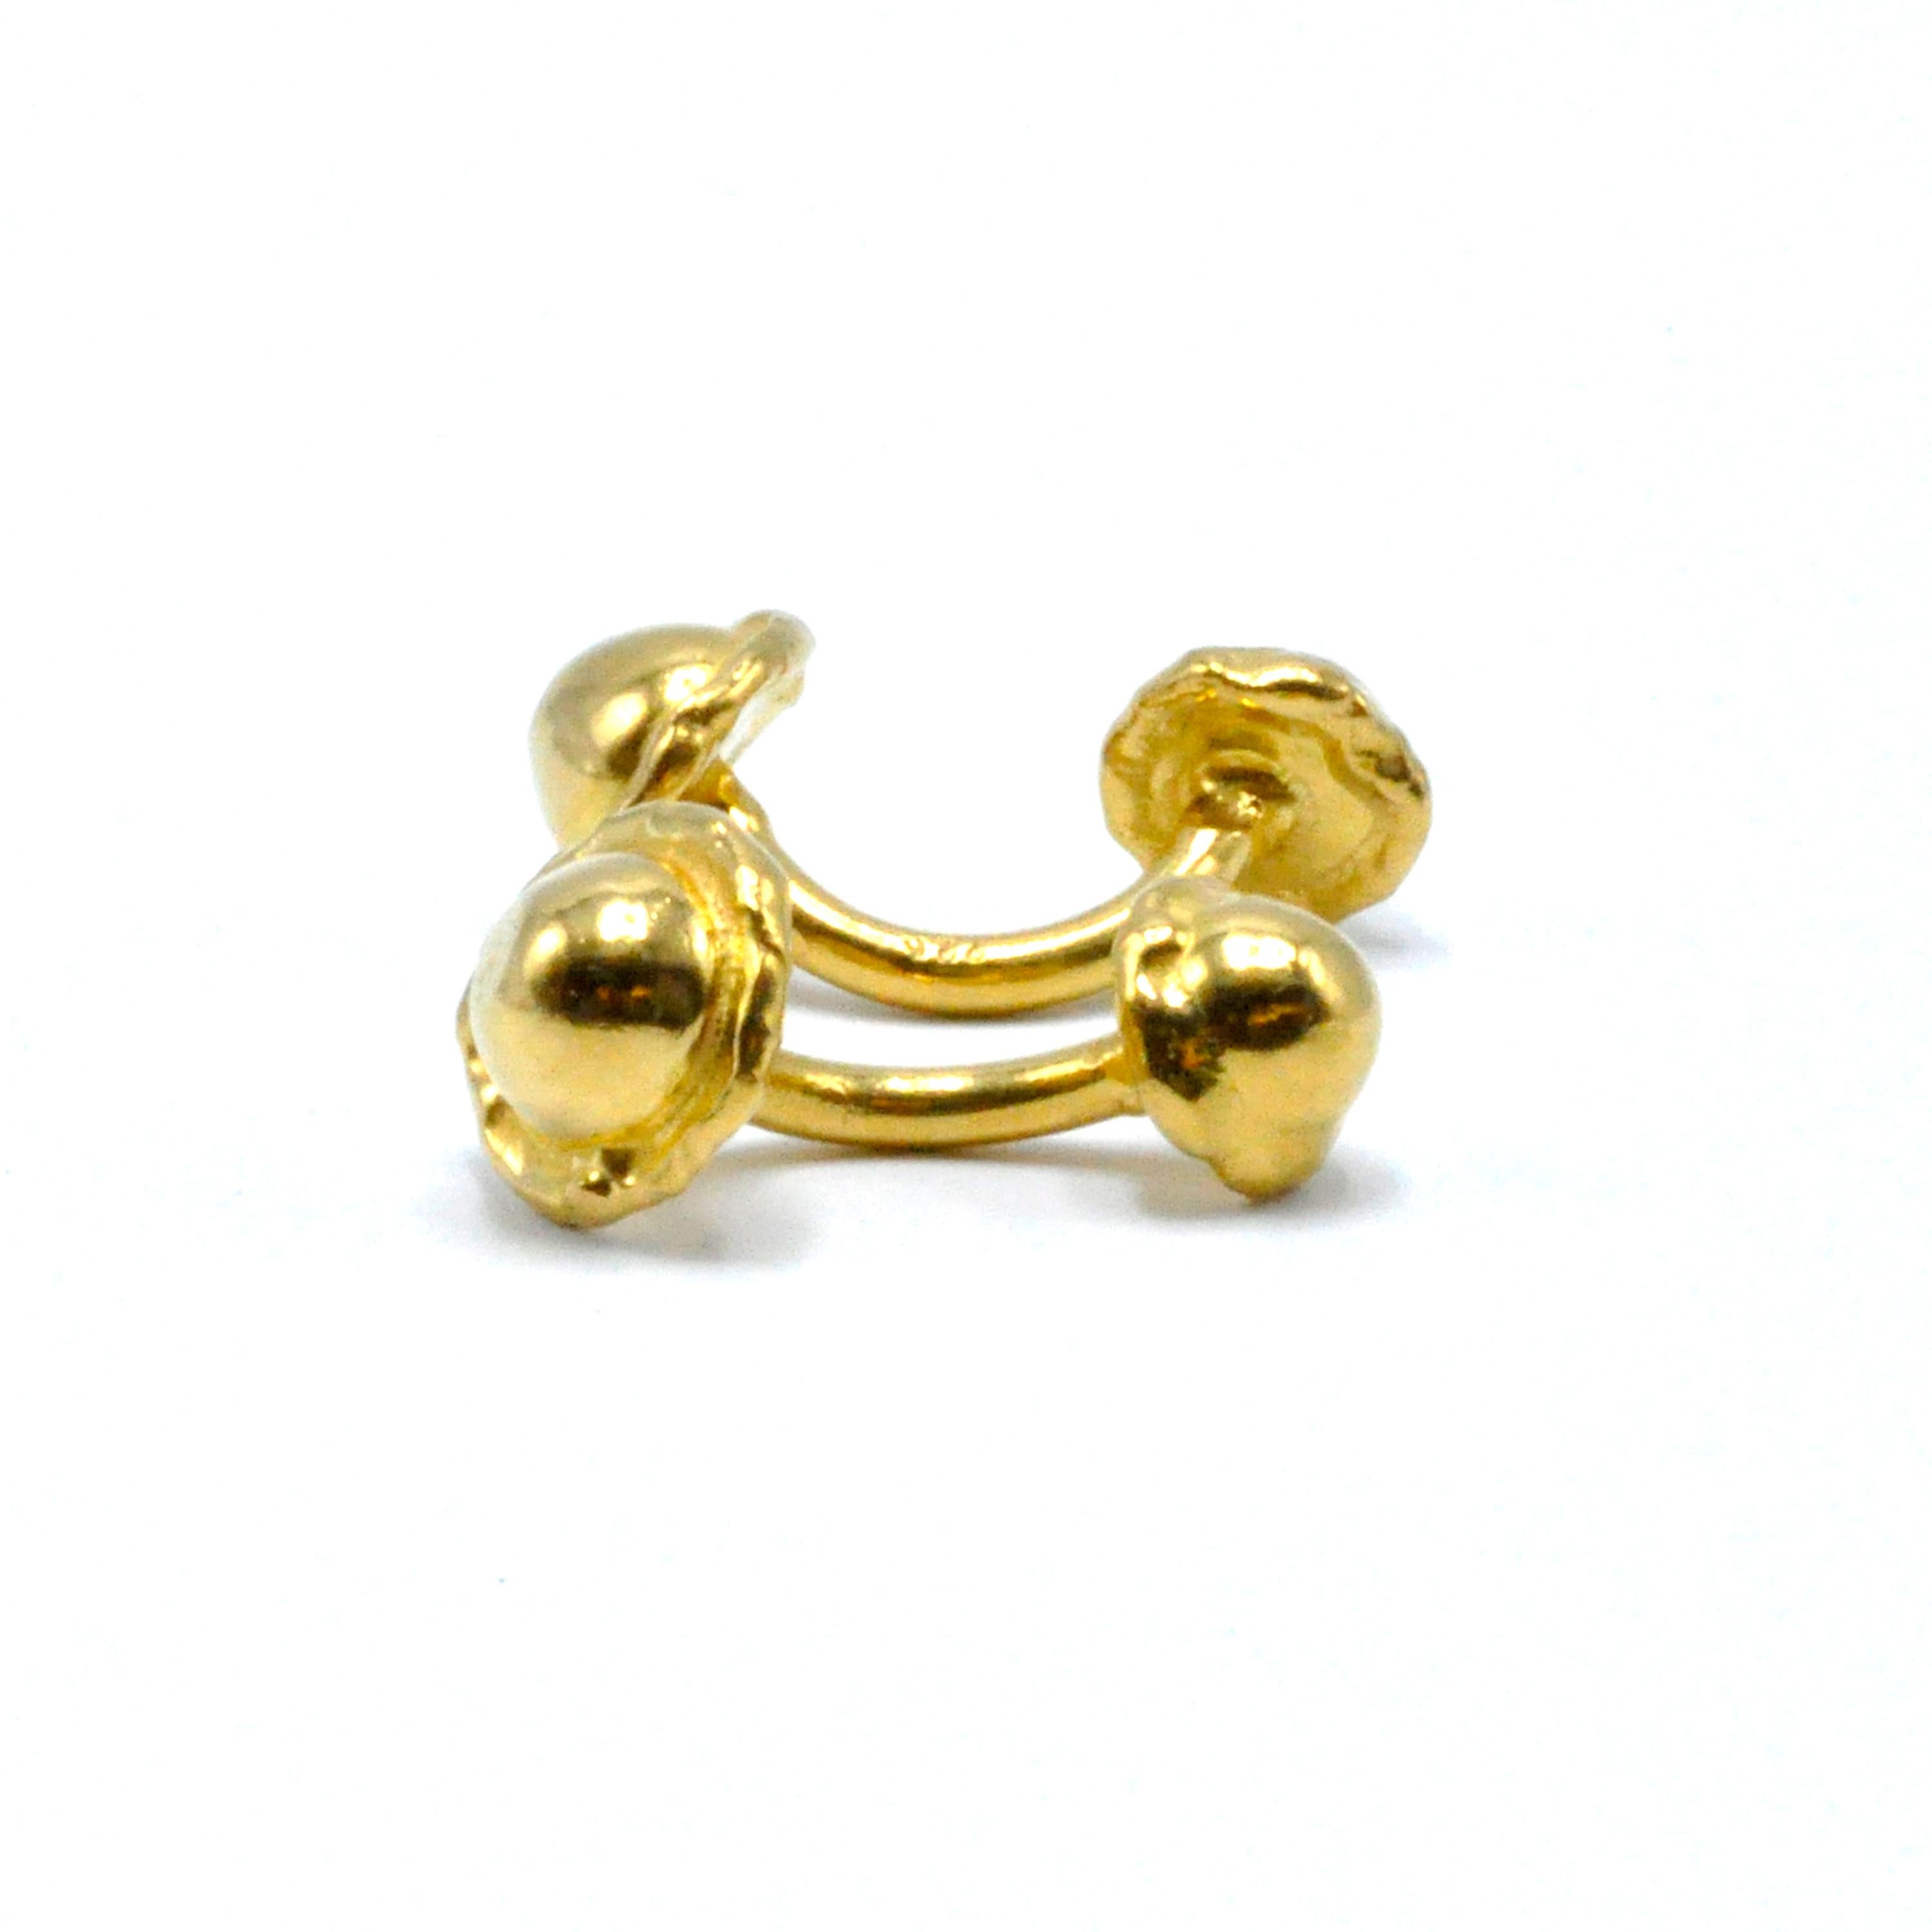 These bold Mahie 22 karat yellow gold cufflinks are sure to define your look. 

Stamped: 22K, JM
